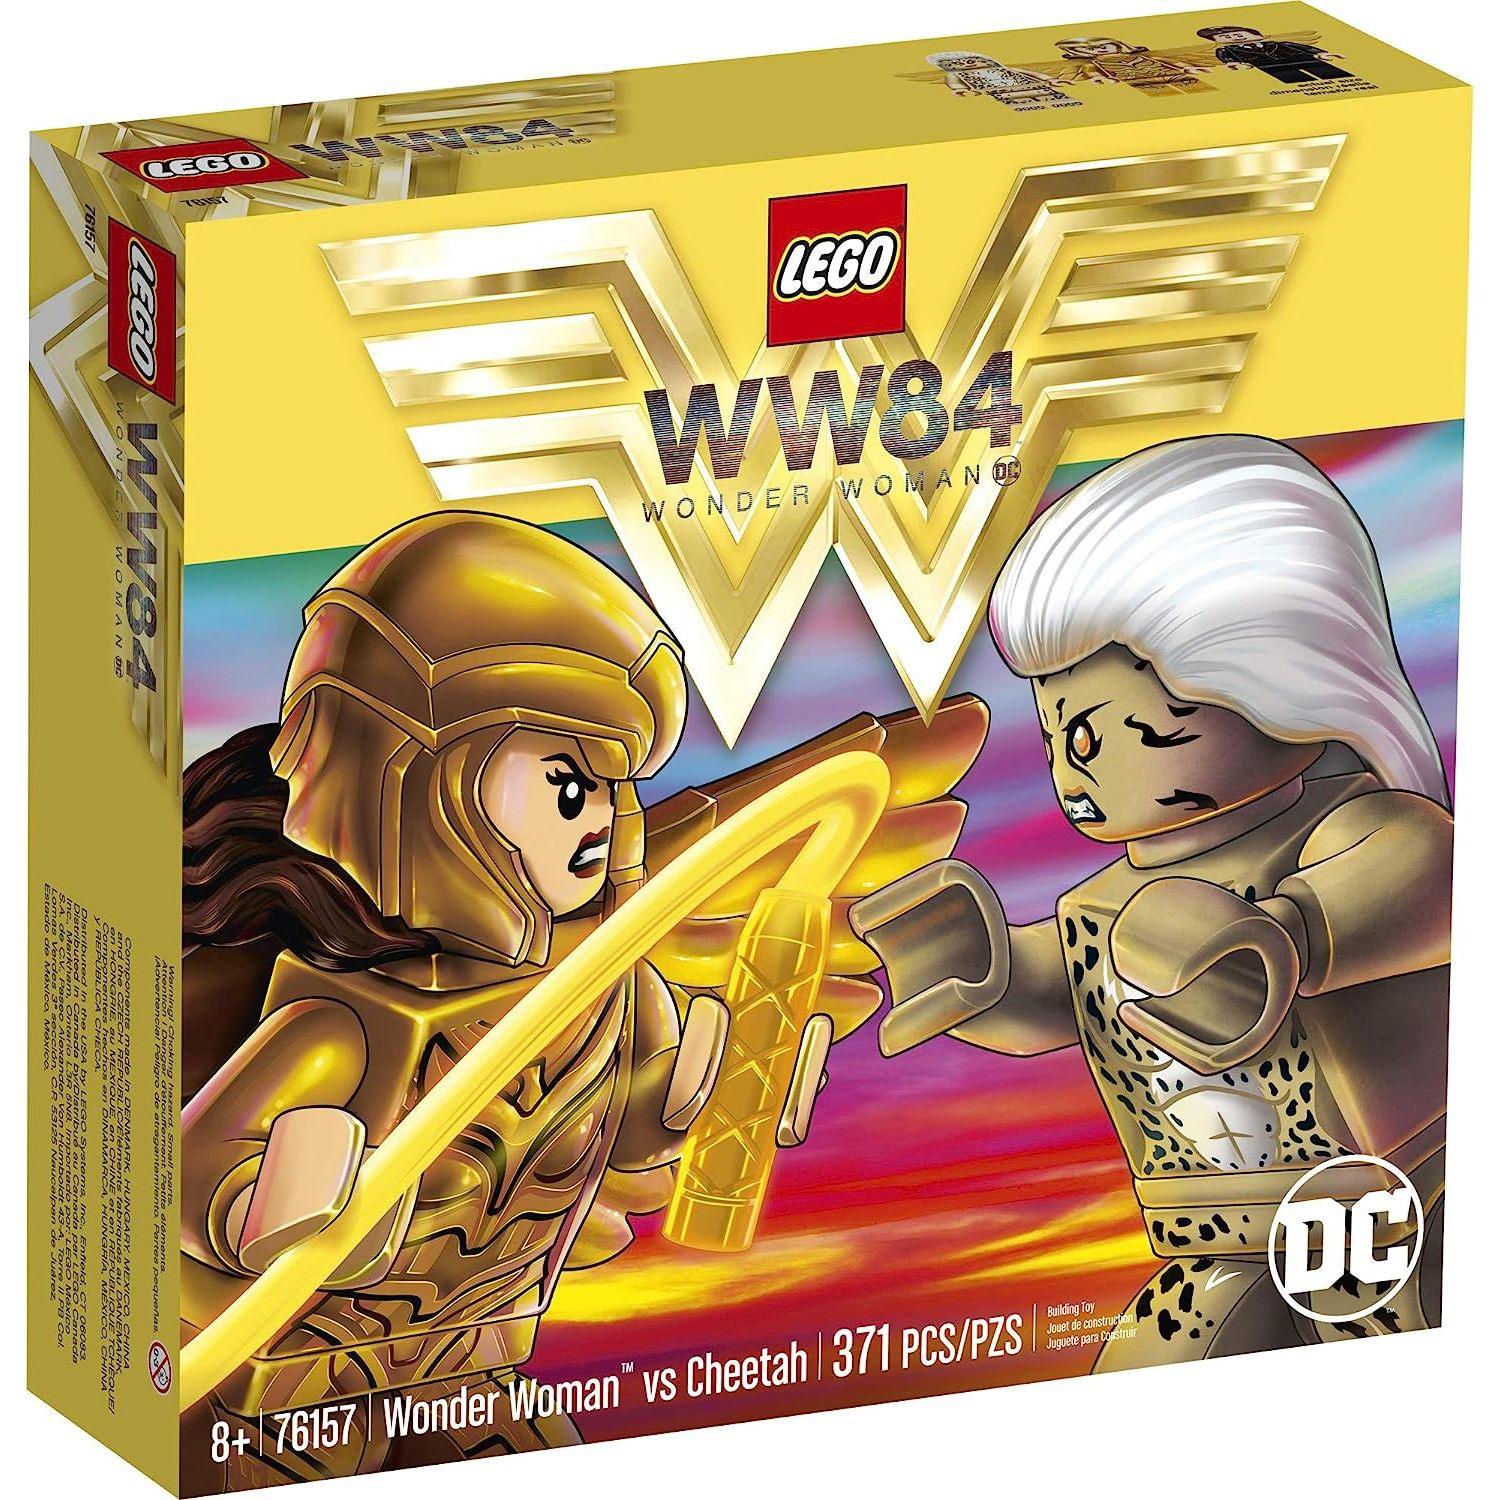 LEGO 76157 DC Wonder Woman vs Cheetah with Wonder Woman (Diana Prince), The Cheetah (Barbara Minerva) and Max (371 Pieces) - BumbleToys - 14 Years & Up, 8+ Years, Boys, DC, LEGO, OXE, Pre-Order